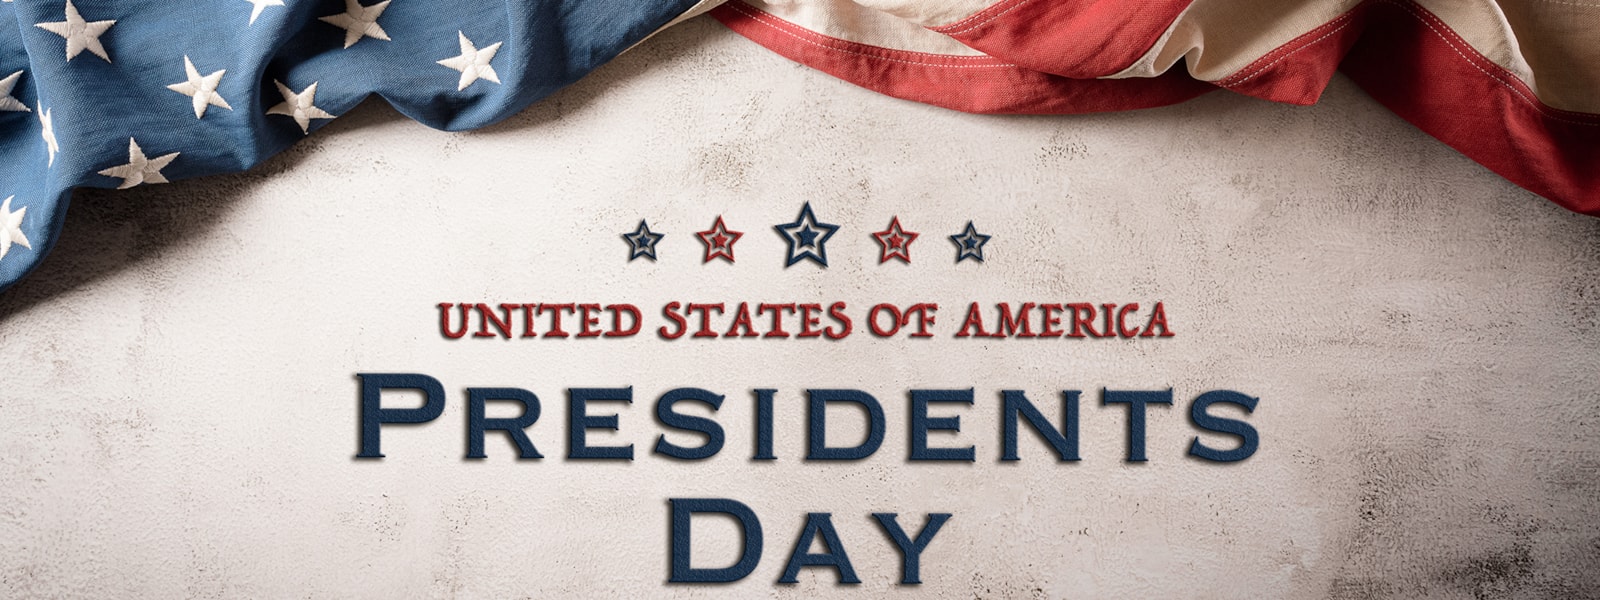 United States of America Presidents Day with flag and stars 